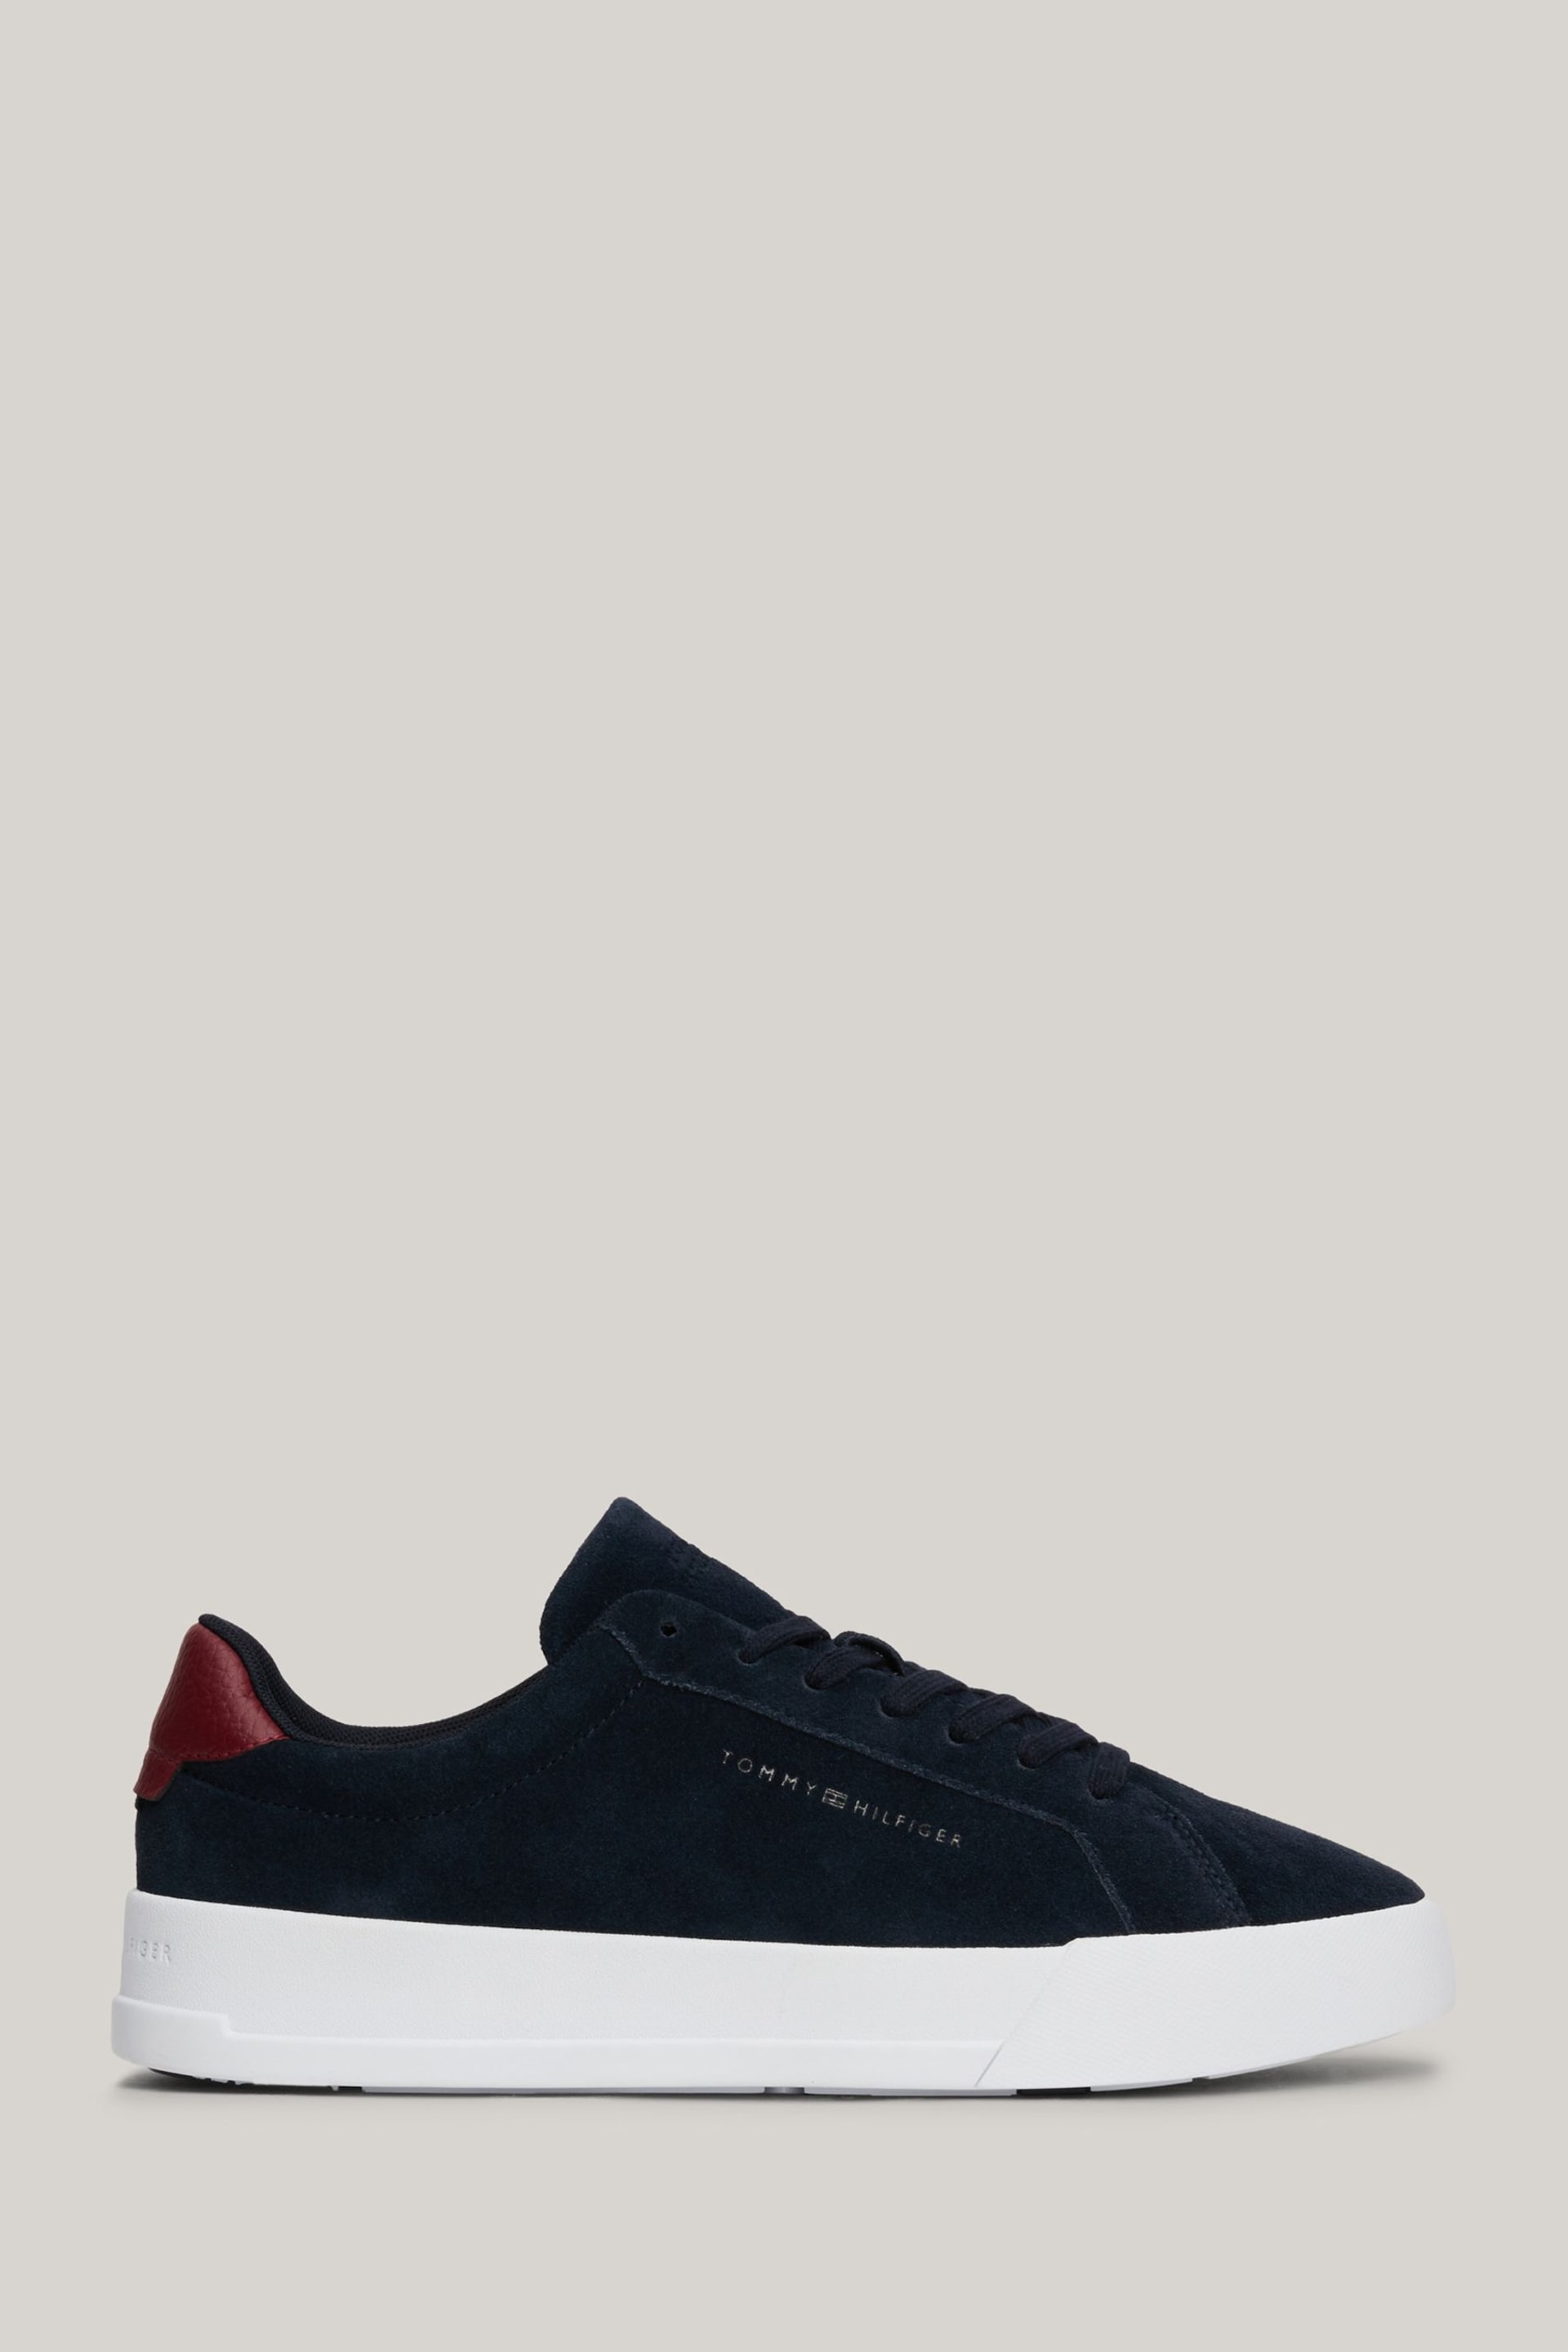 Tommy Hilfiger Blue Court Suede Sneakers - Image 1 of 5